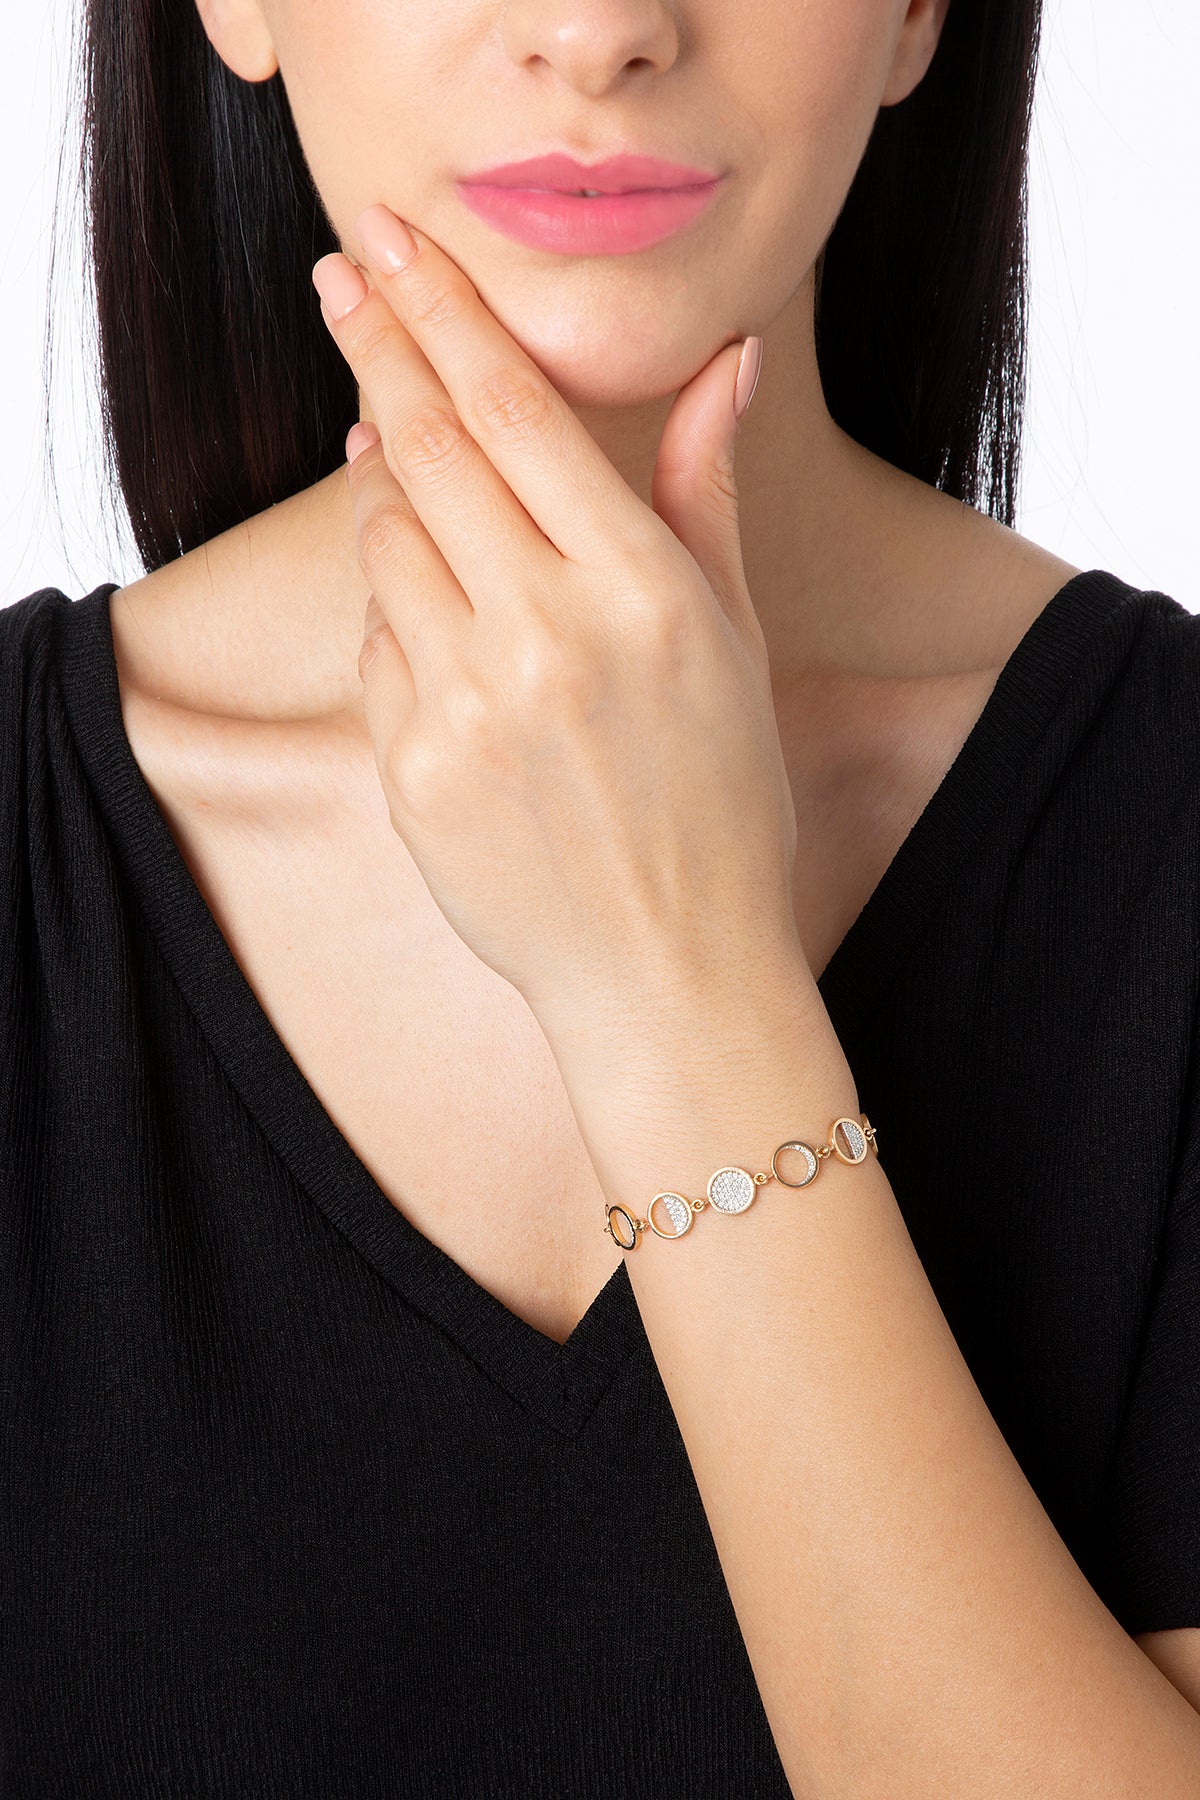 Moon Phases in Yellow Gold - Her Story Shop